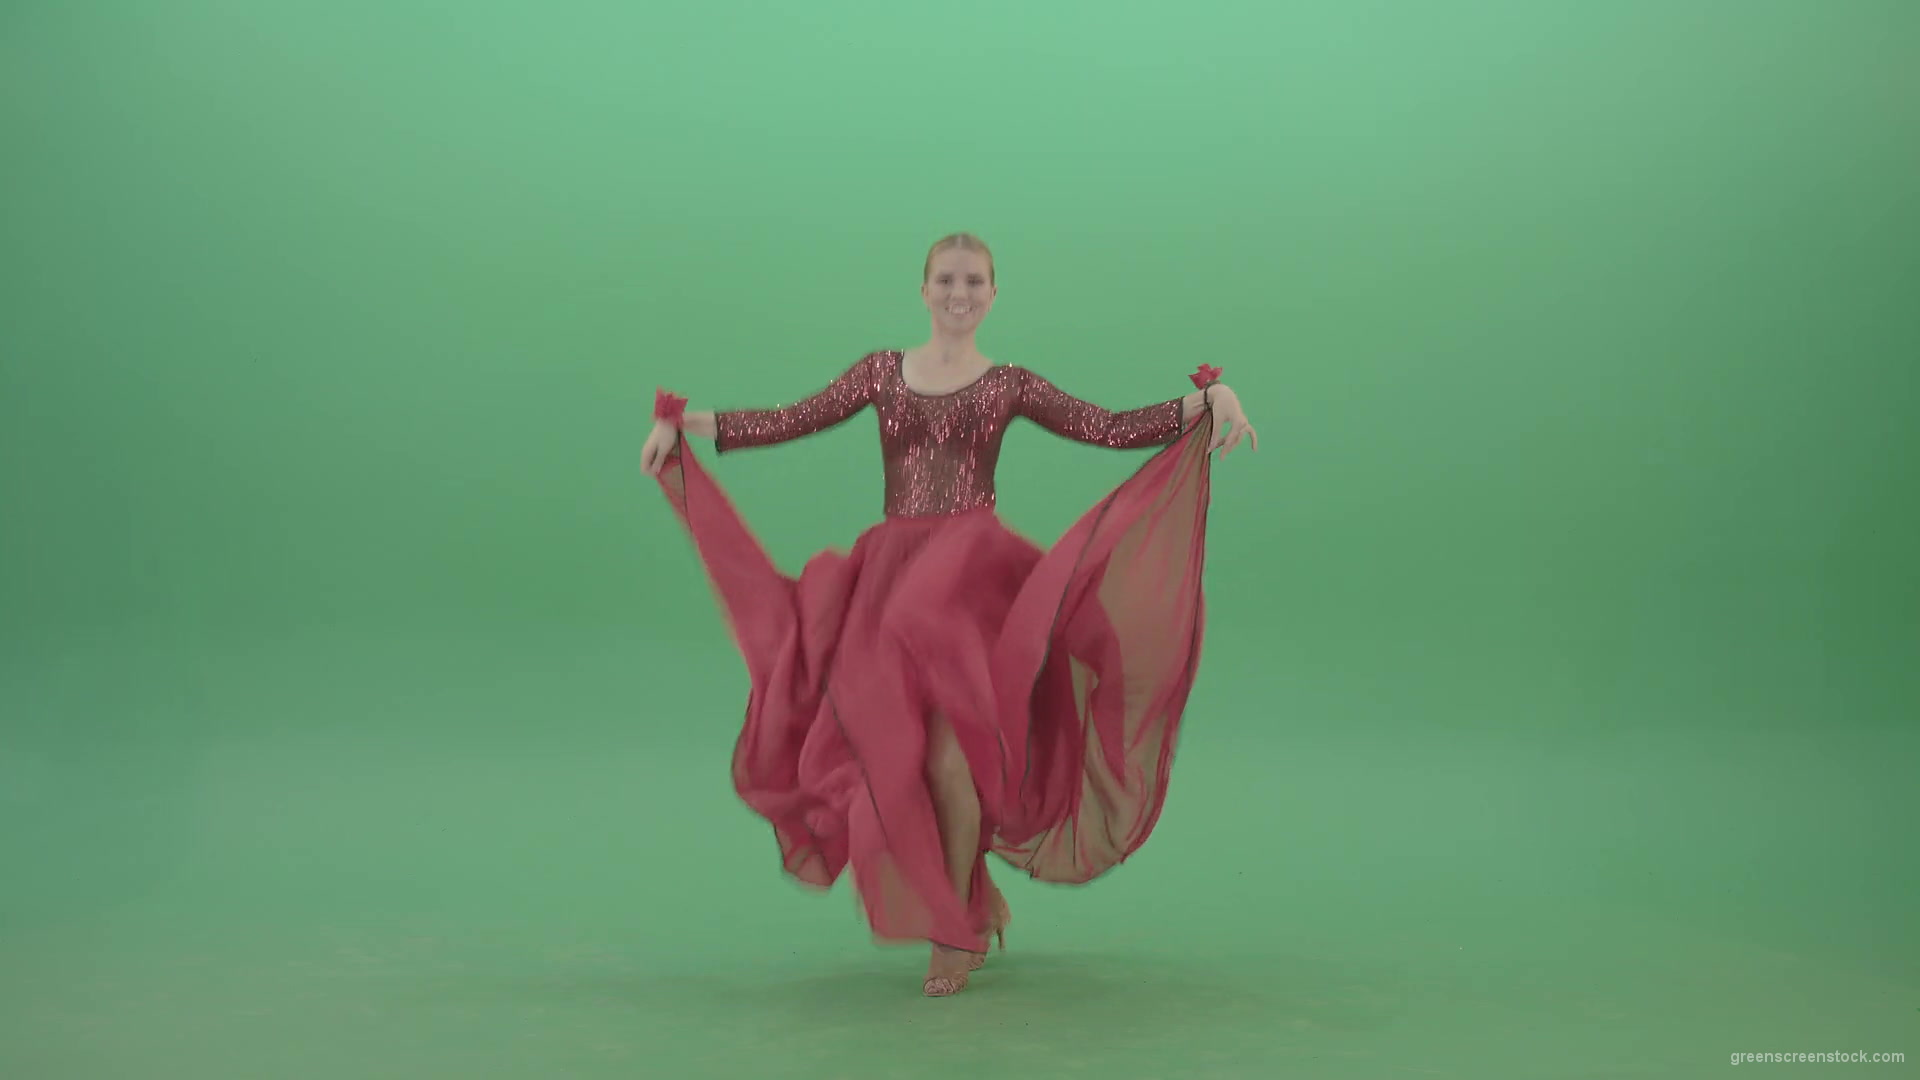 Moulin-rouge-dancing-girl-in-red-dress-jumping-on-green-screen-4K-Video-Footage-1920_005 Green Screen Stock